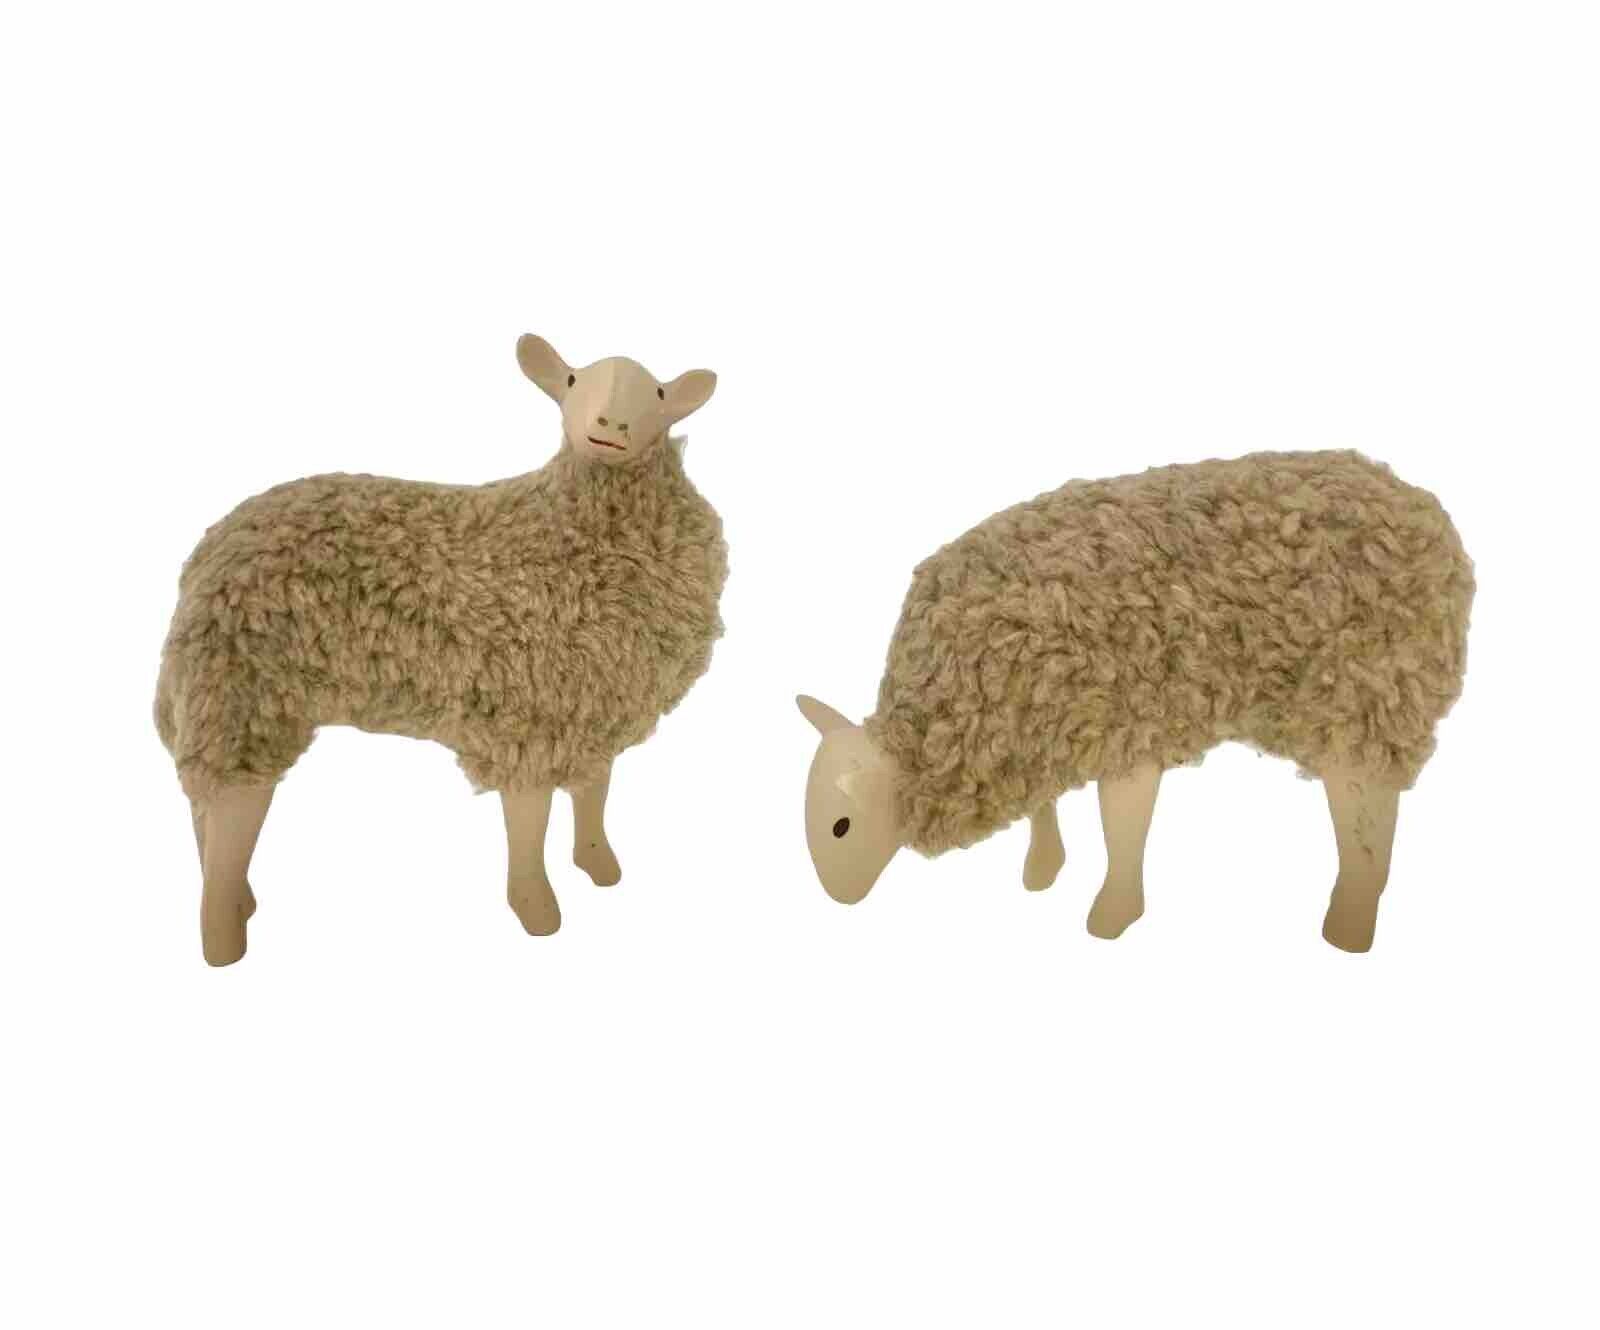 Sheep Figurine Pair Porcelain and Wool Lamb Statues Vintage Adorable Decor